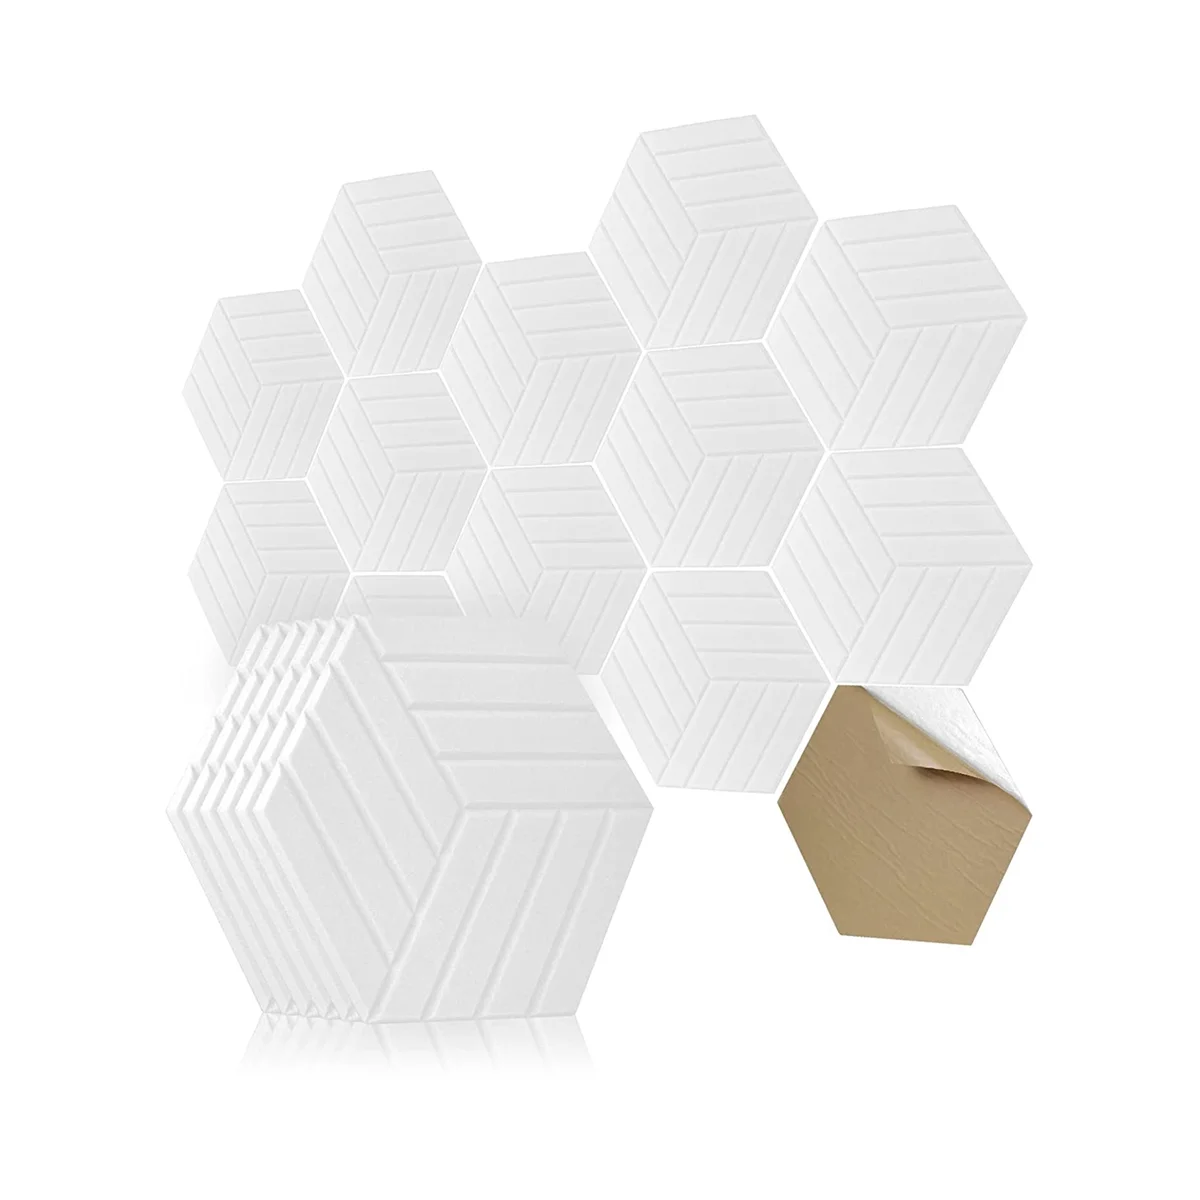 

Sound Proof Panels Hexagon Self-Adhesive,12 Pcs Acoustic Panel, Sound Dampening Panel for Studio Office Home,2